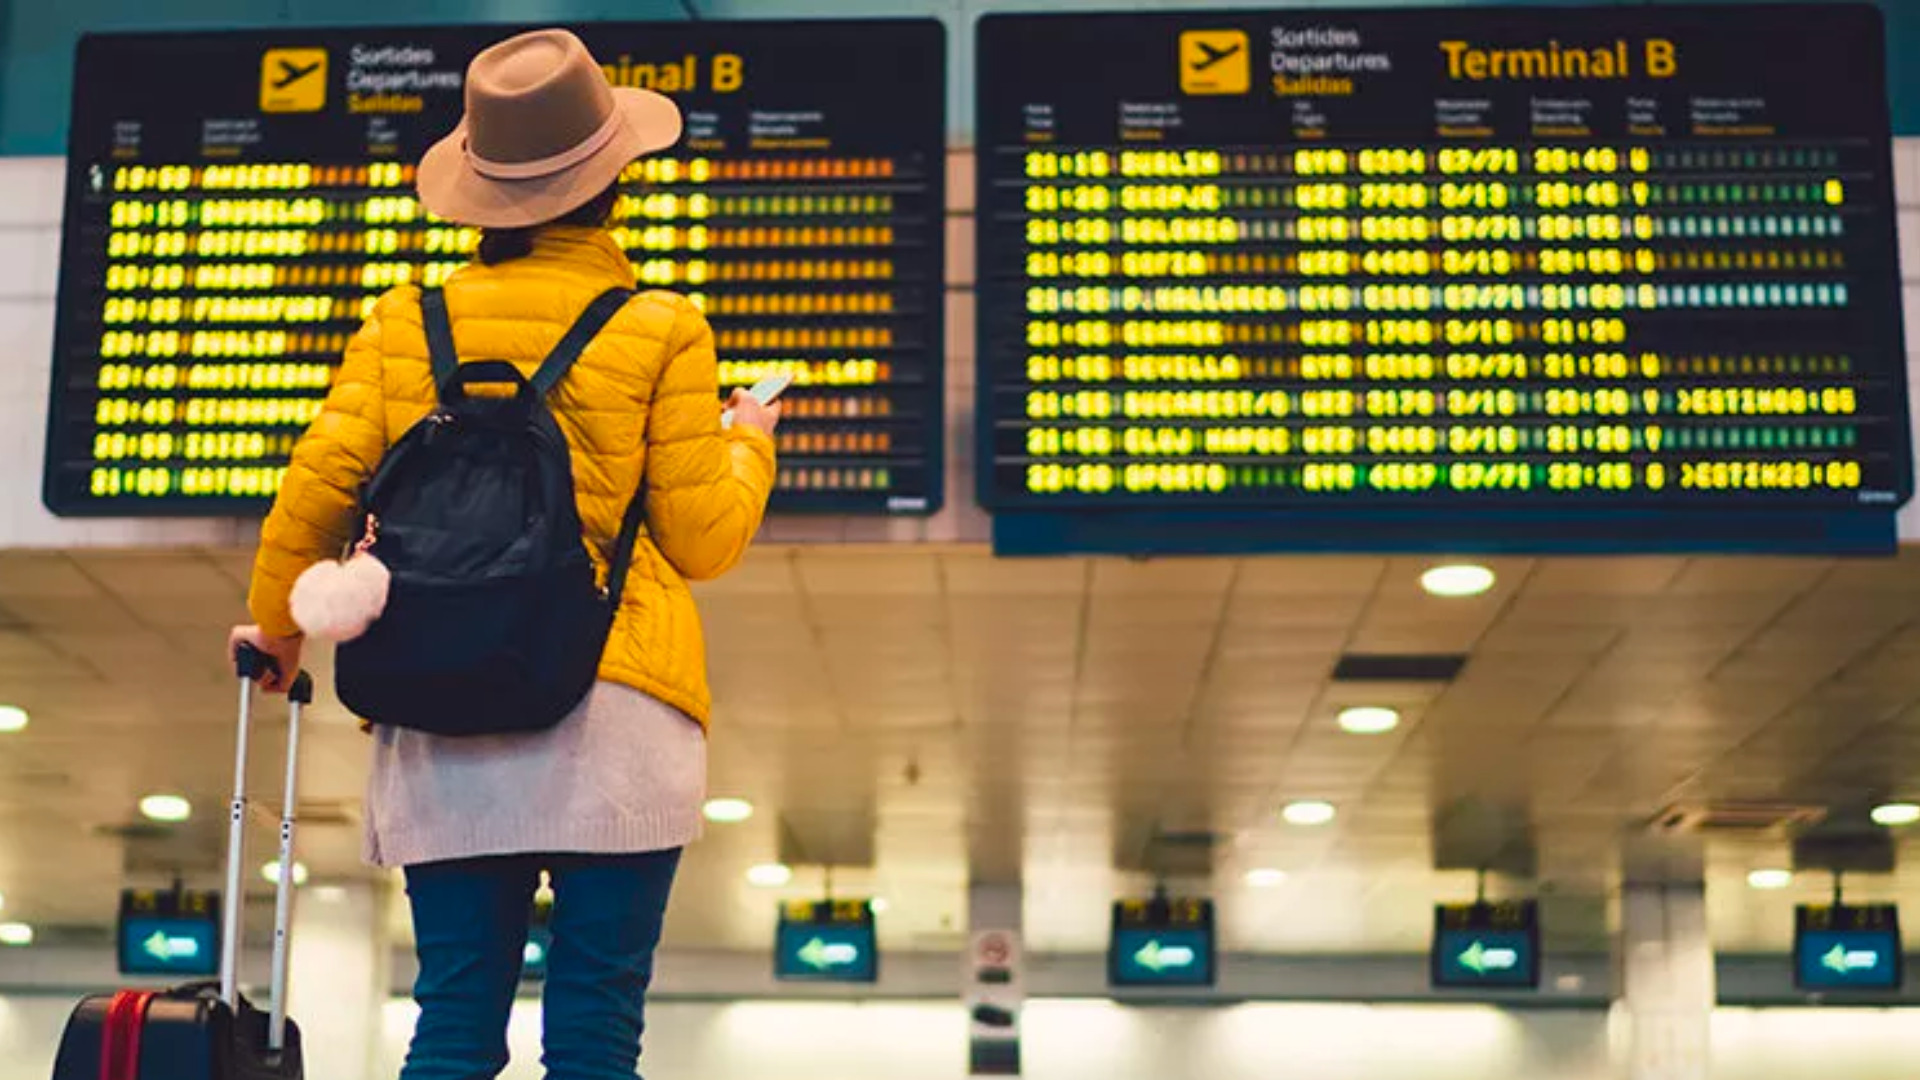 A travel expert's guide to managing (and avoiding) airport delays